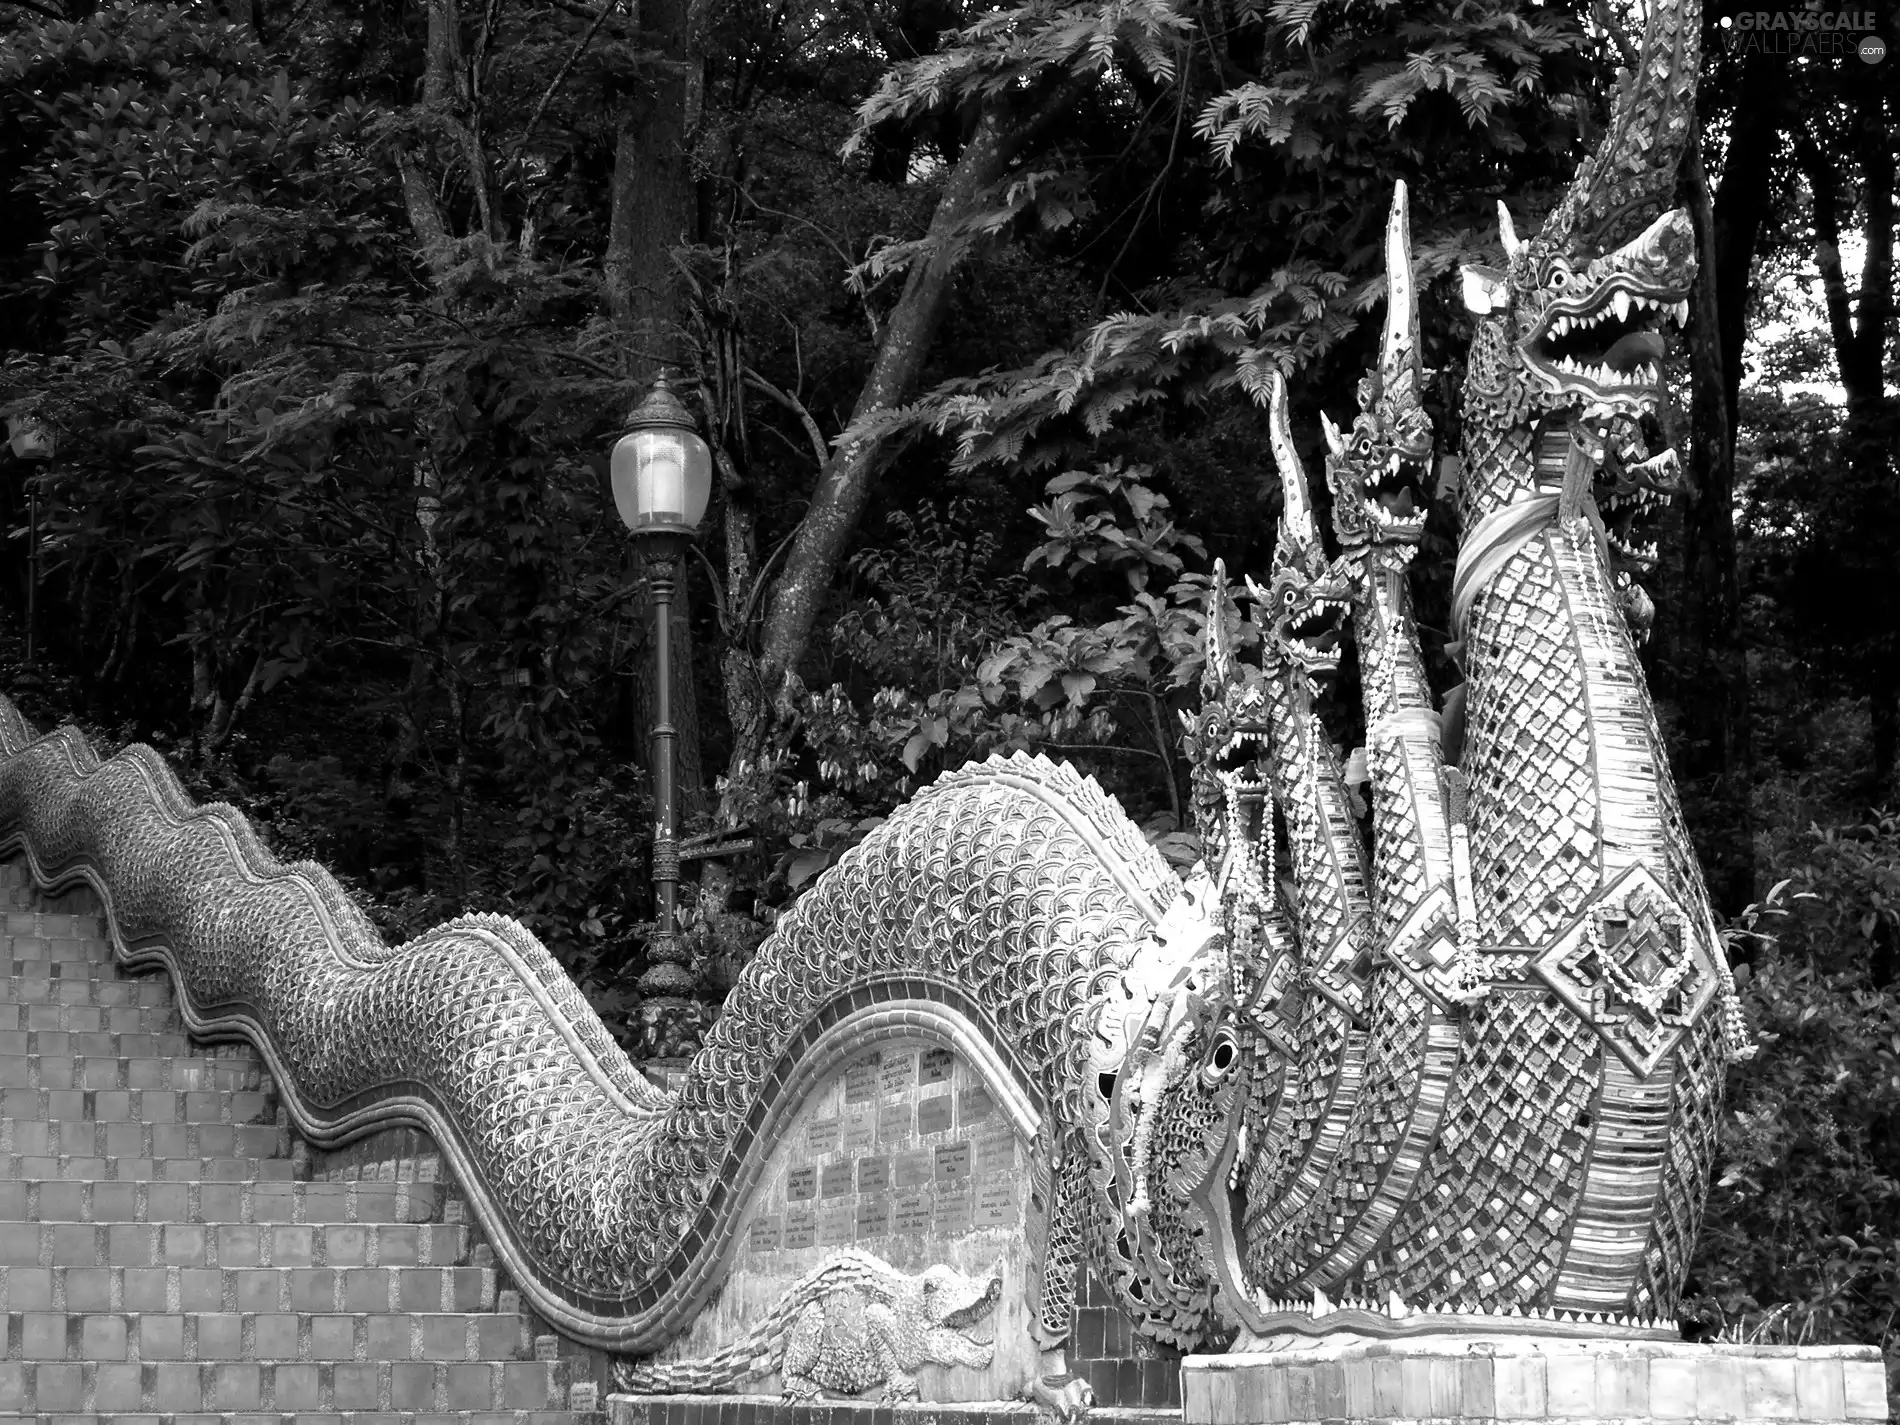 Stairs, Thailand, Statue monument, Dragon, Park